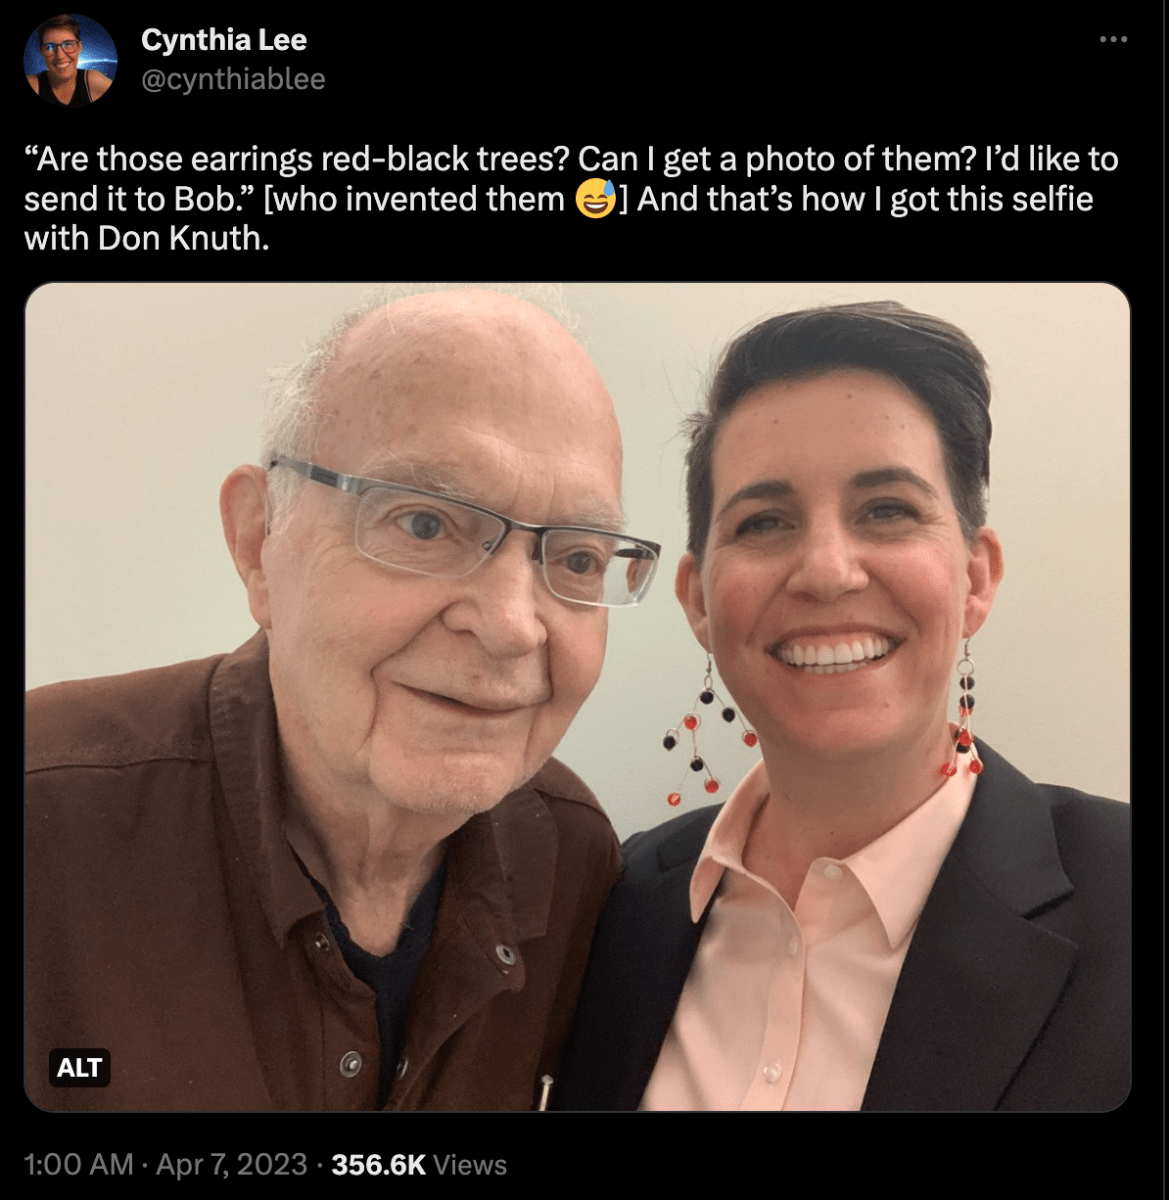 Cynthia Lee's tweet about meeting Donald Knuth. Lee wears red and black wooden earrings.